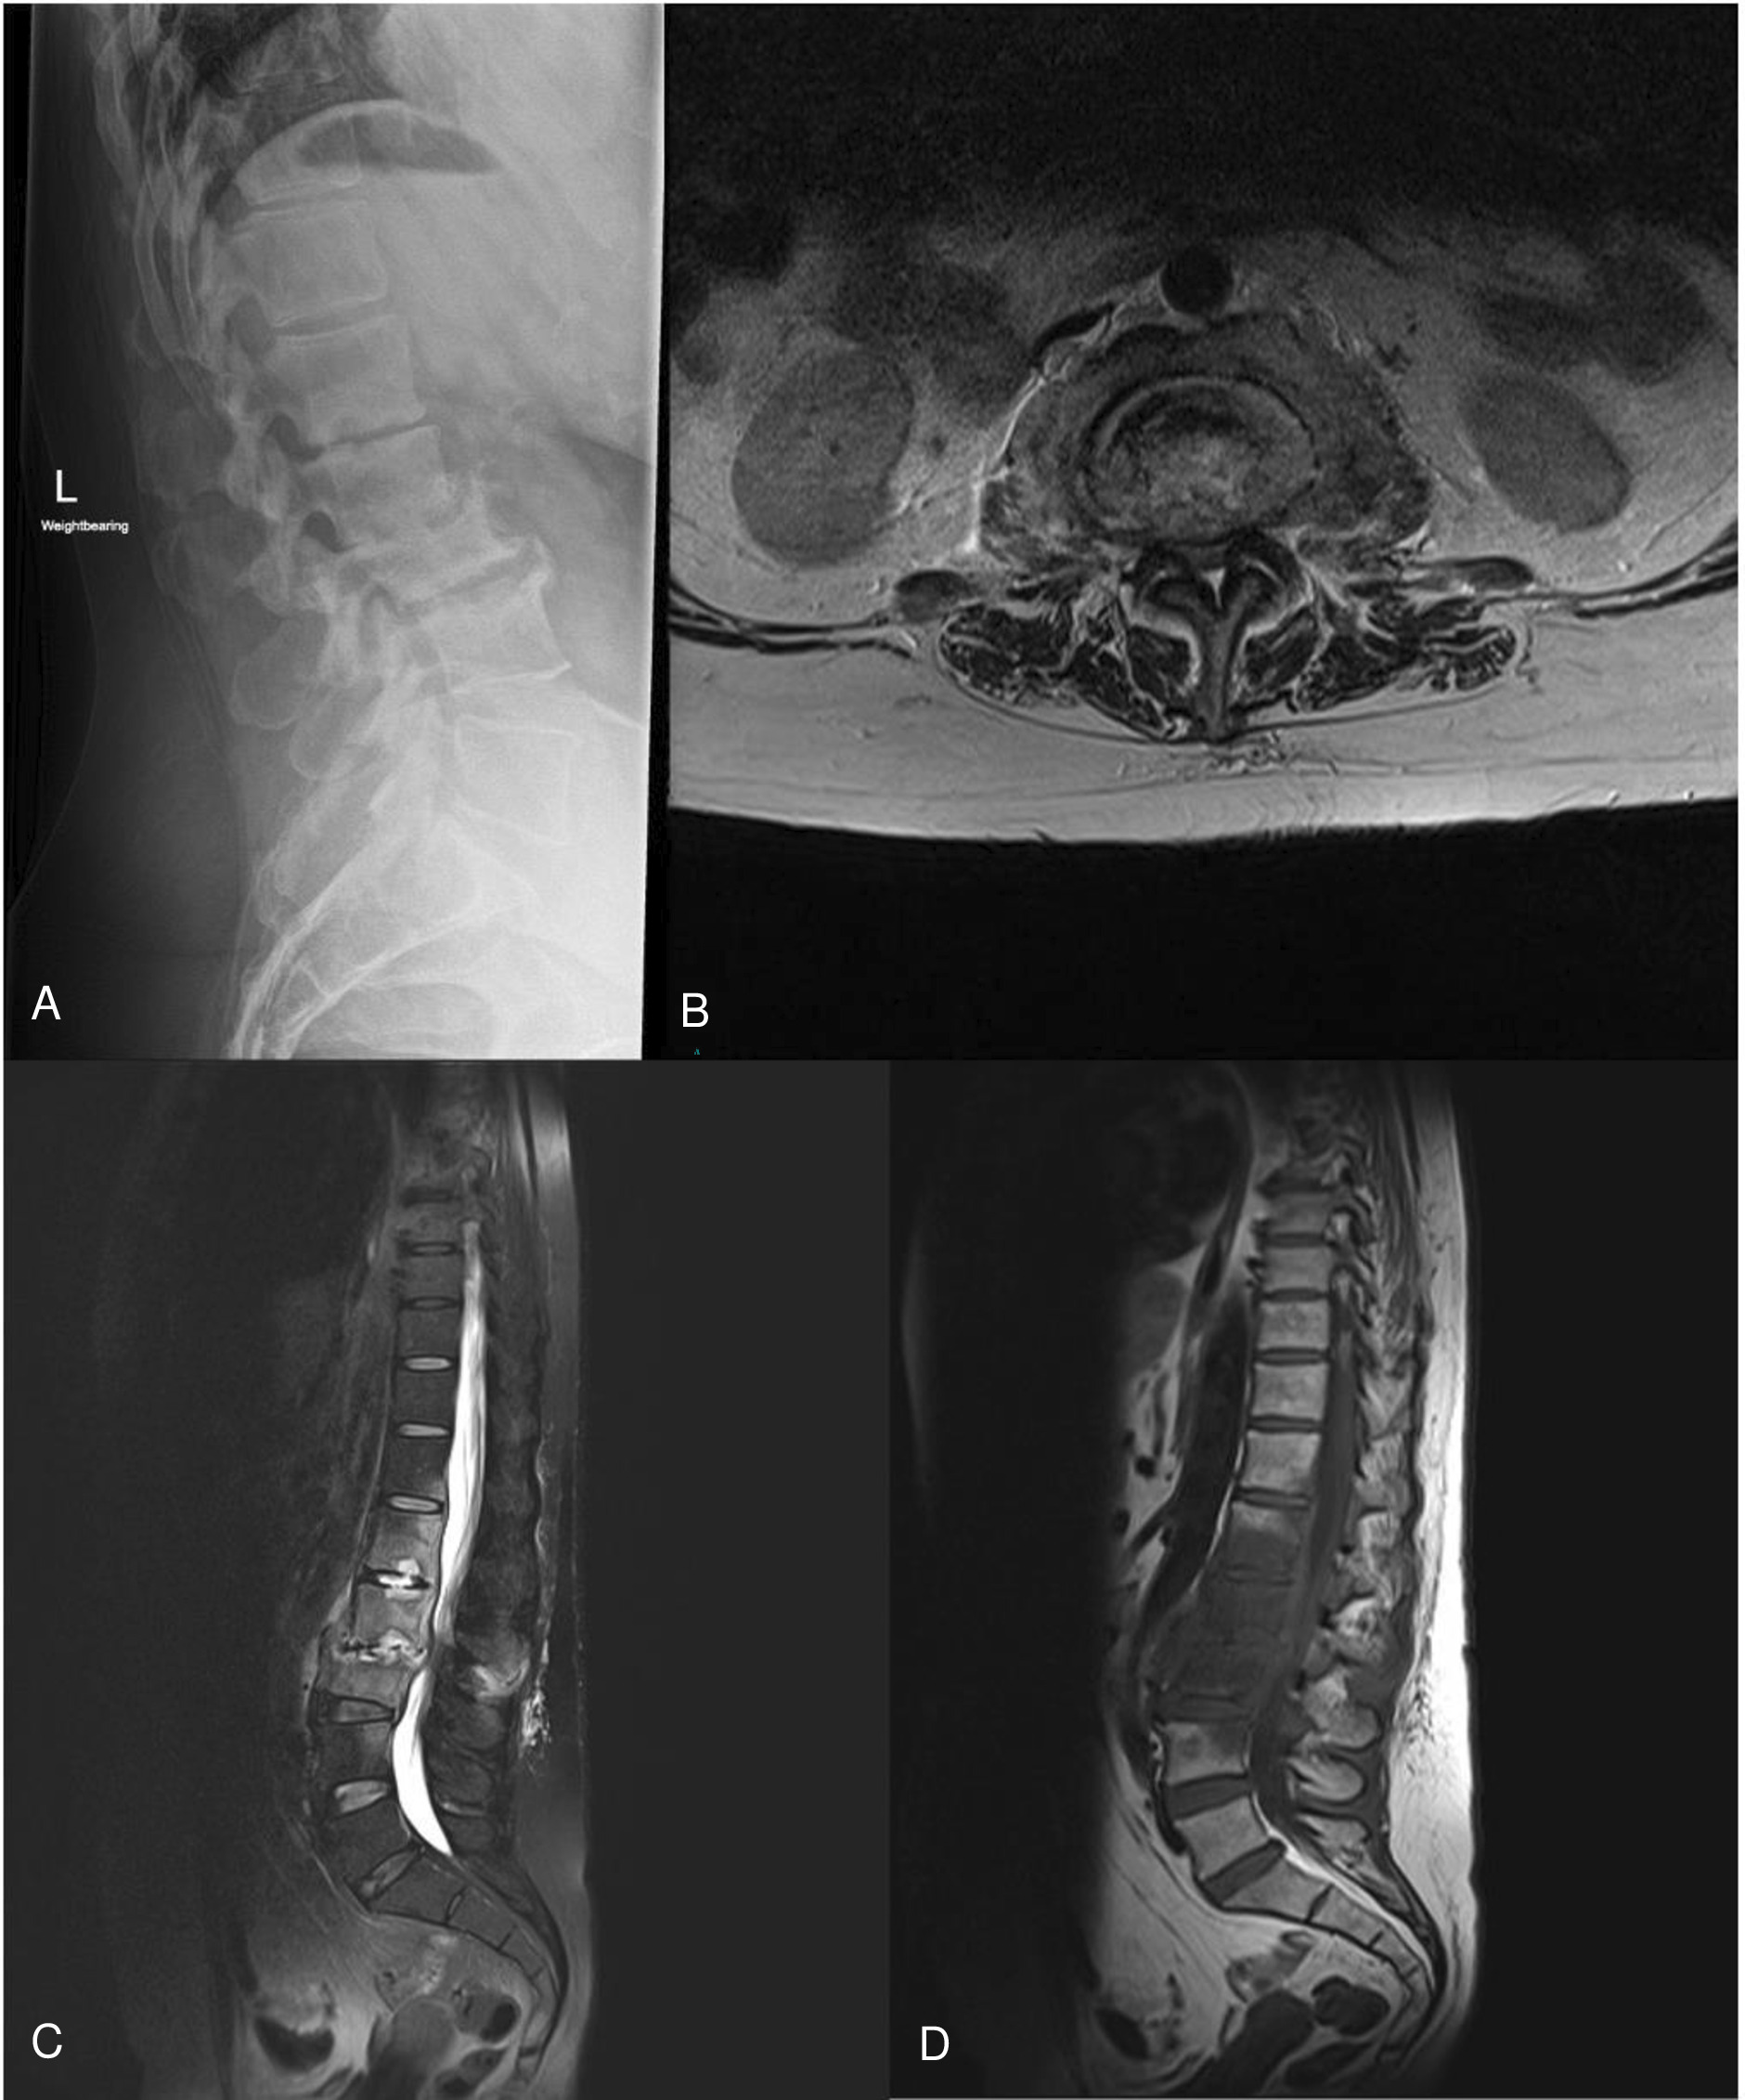 Fig. 2 
            a) Lateral lumbar spine radiograph showing L2/3 discitis with L2/3 disc space destruction, less than 50% destruction of L3 and mild inferior endplate of L2 destruction. There is mild endplate destruction at L3/4. b) Axial T2 image shows epidural and paraspinal abscesses. c) to d) Inflammatory tissue in the paraspinal region. Inflammation in the right psoas, which can progress to a psoas abscess. T2 and T1 sagittal MRI imaging shows disc space destruction and fluid collections such as epidural abscess. d) T1 imaging shows the true extent of the vertebral body involvement extending up into L1 and down into L4.
          